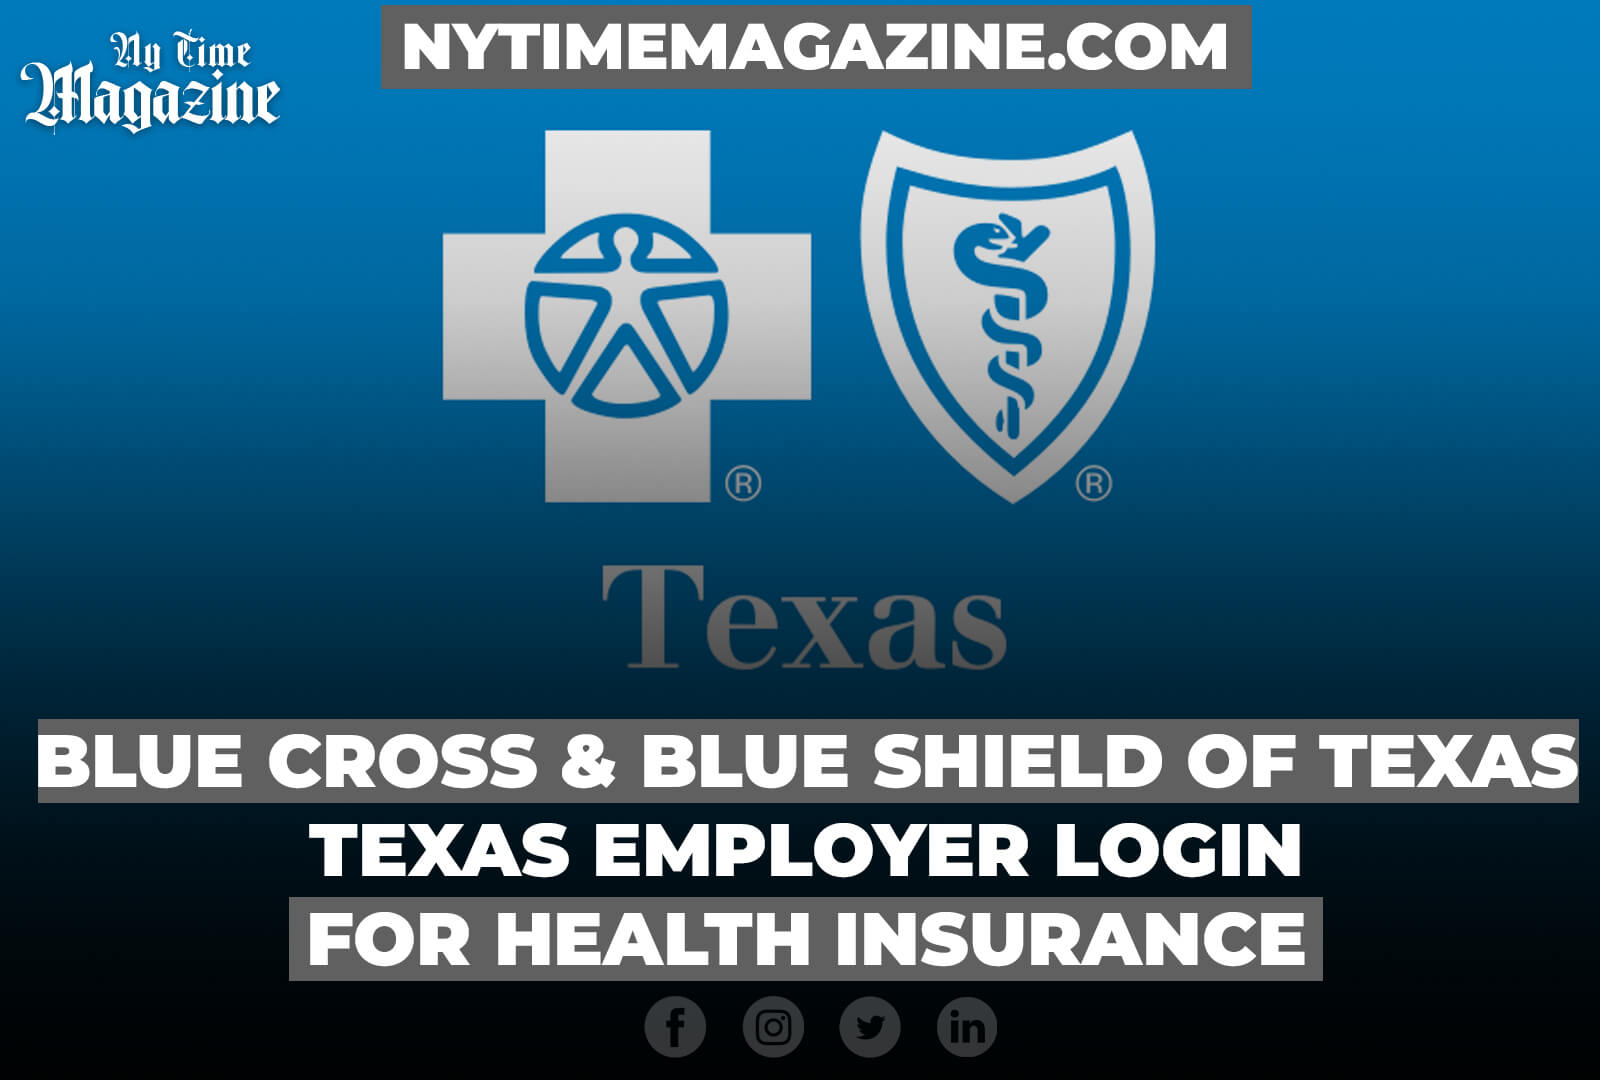 BLUE CROSS AND BLUE SHIELD OF TEXAS: TEXAS EMPLOYER LOGIN FOR HEALTH INSURANCE